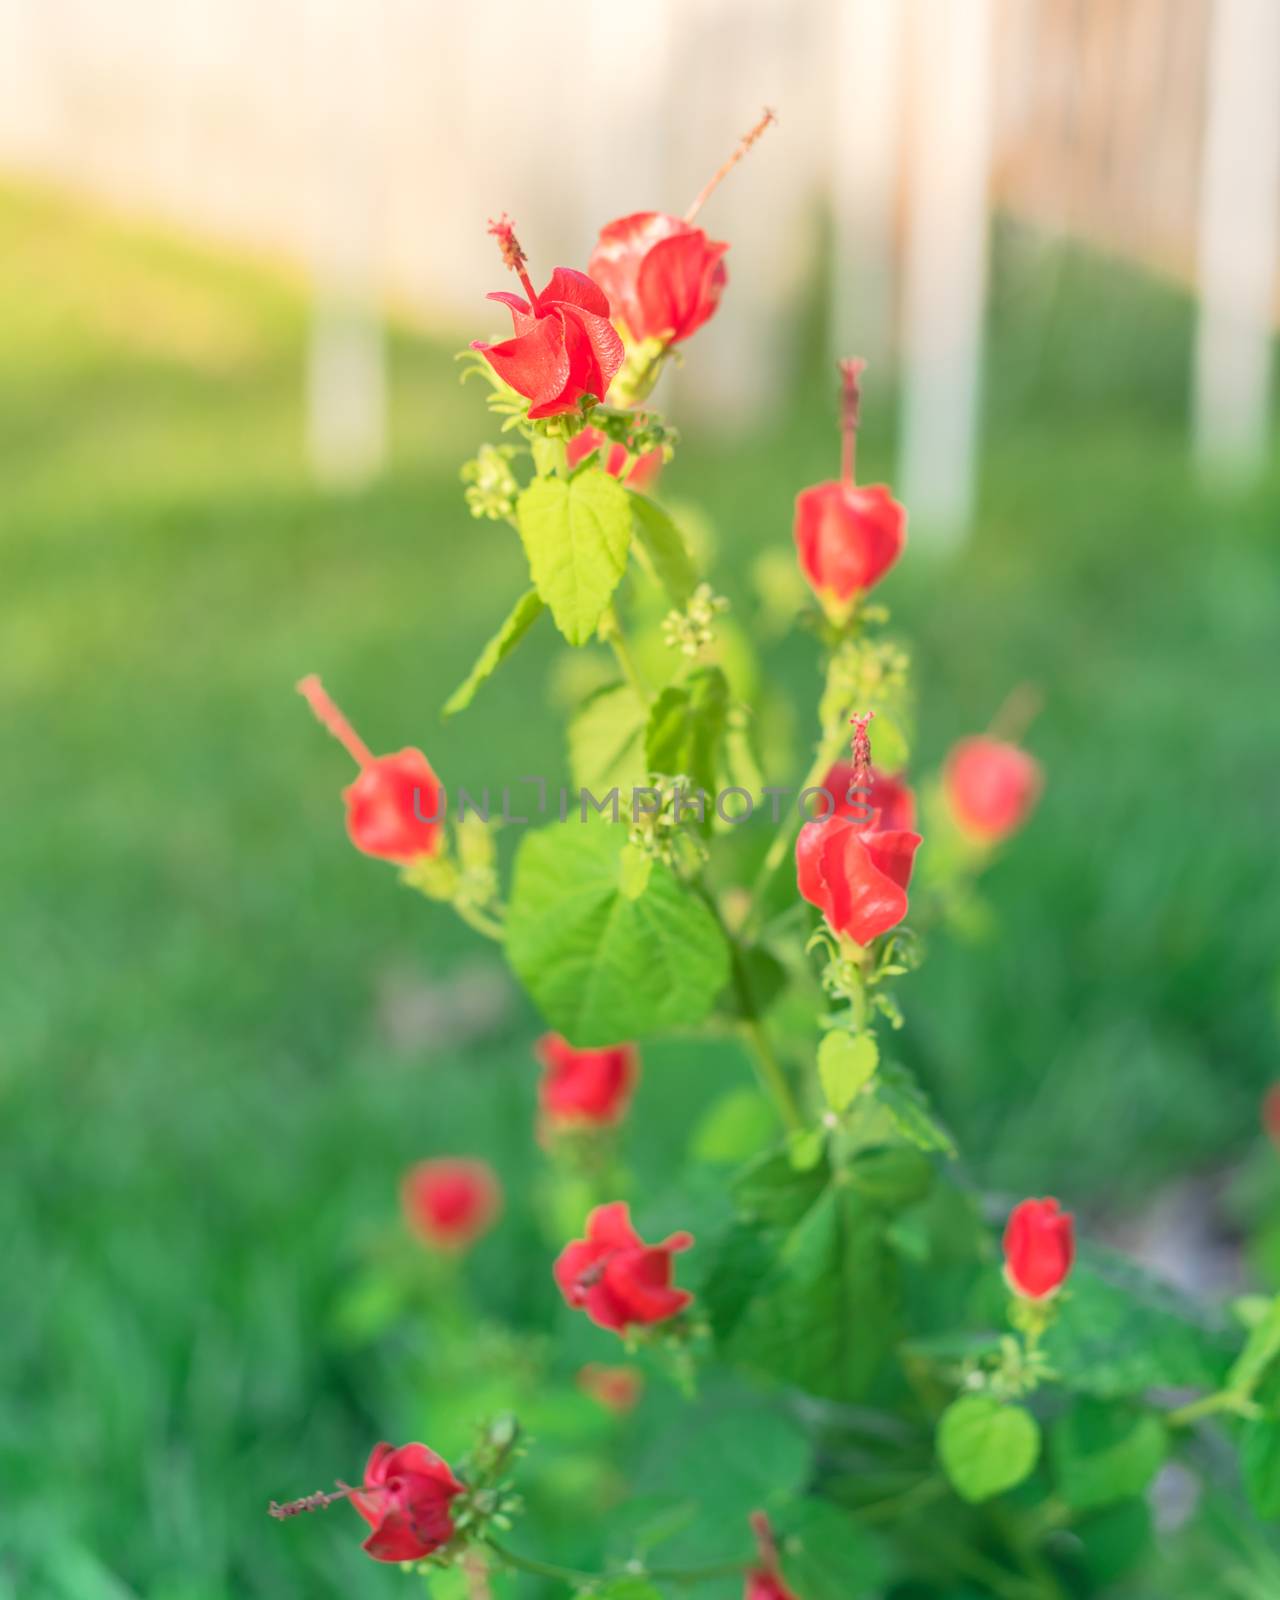 Beautiful Turk's cap or Malvaviscus arboreus red flowers with blurry fence in background. Homegrown tropical Wax mallow near Dallas, Texas, America